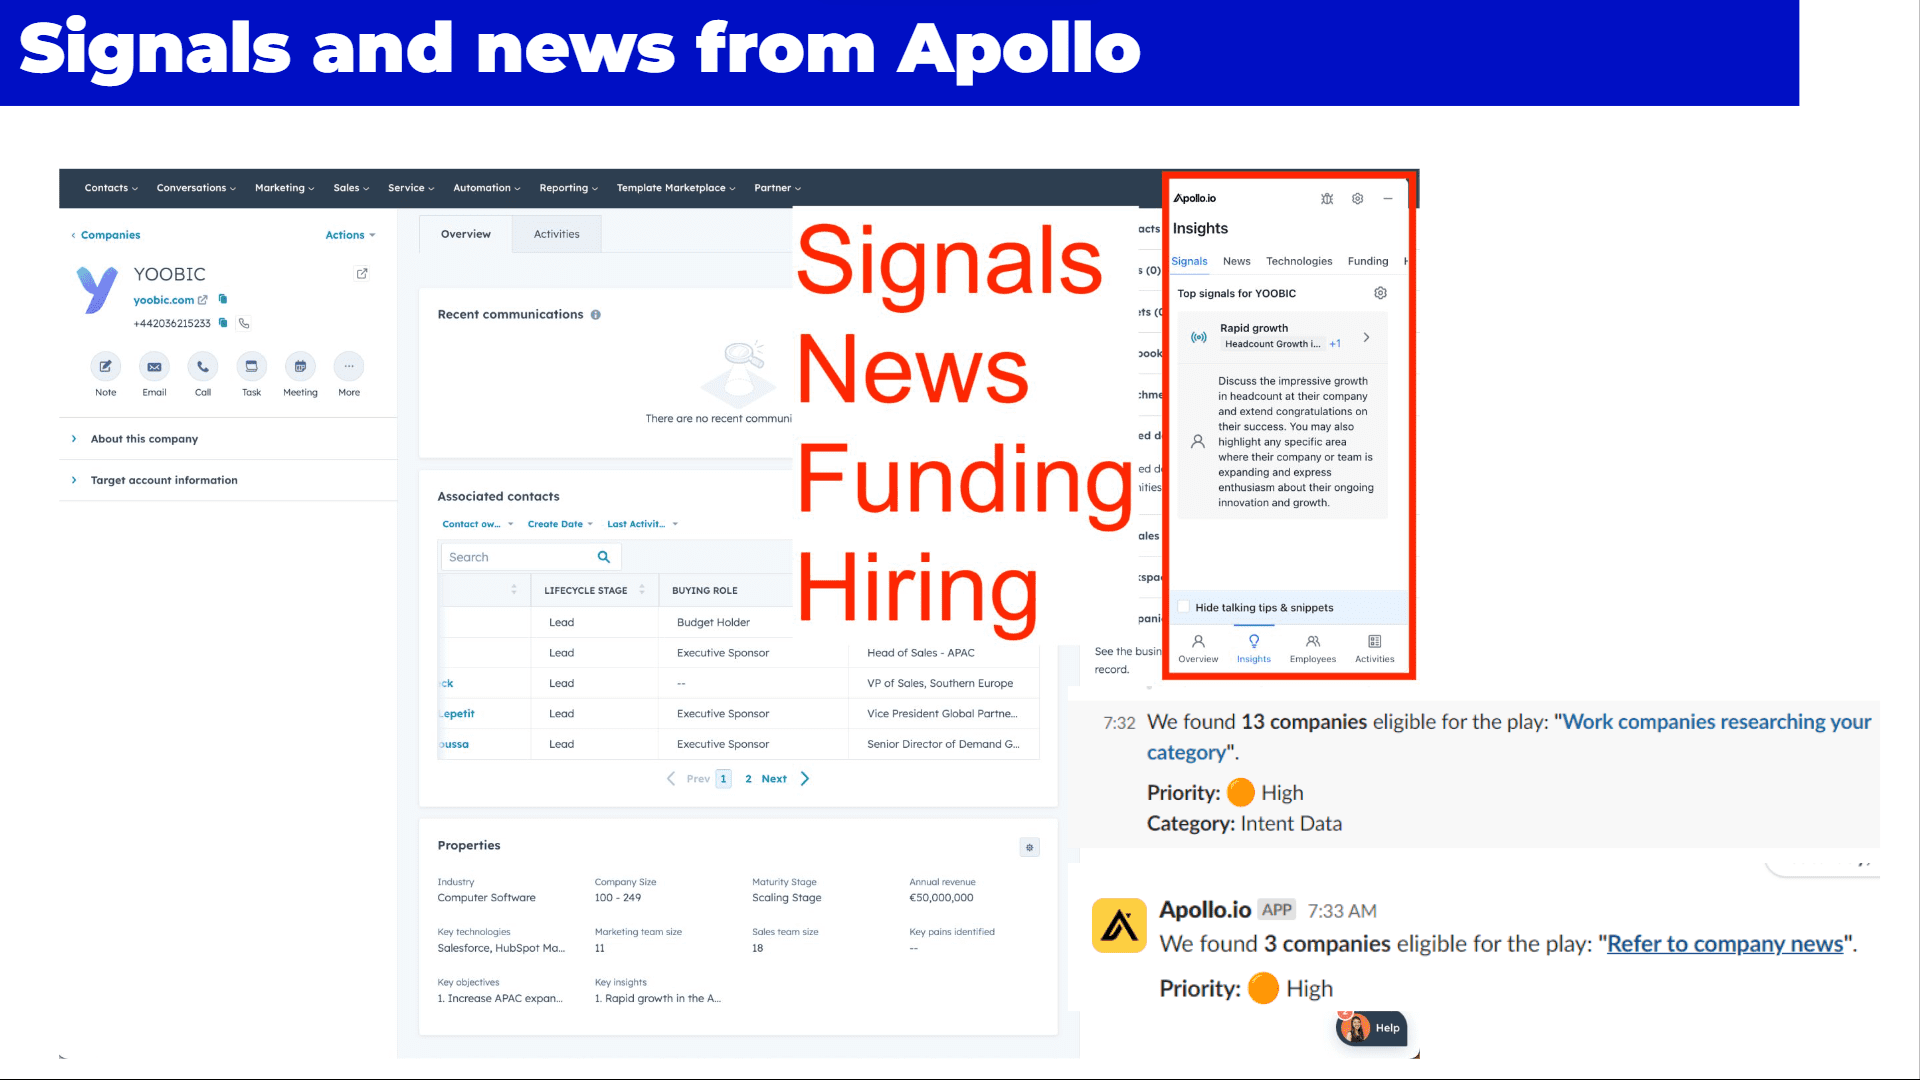 News and signals from Apollo